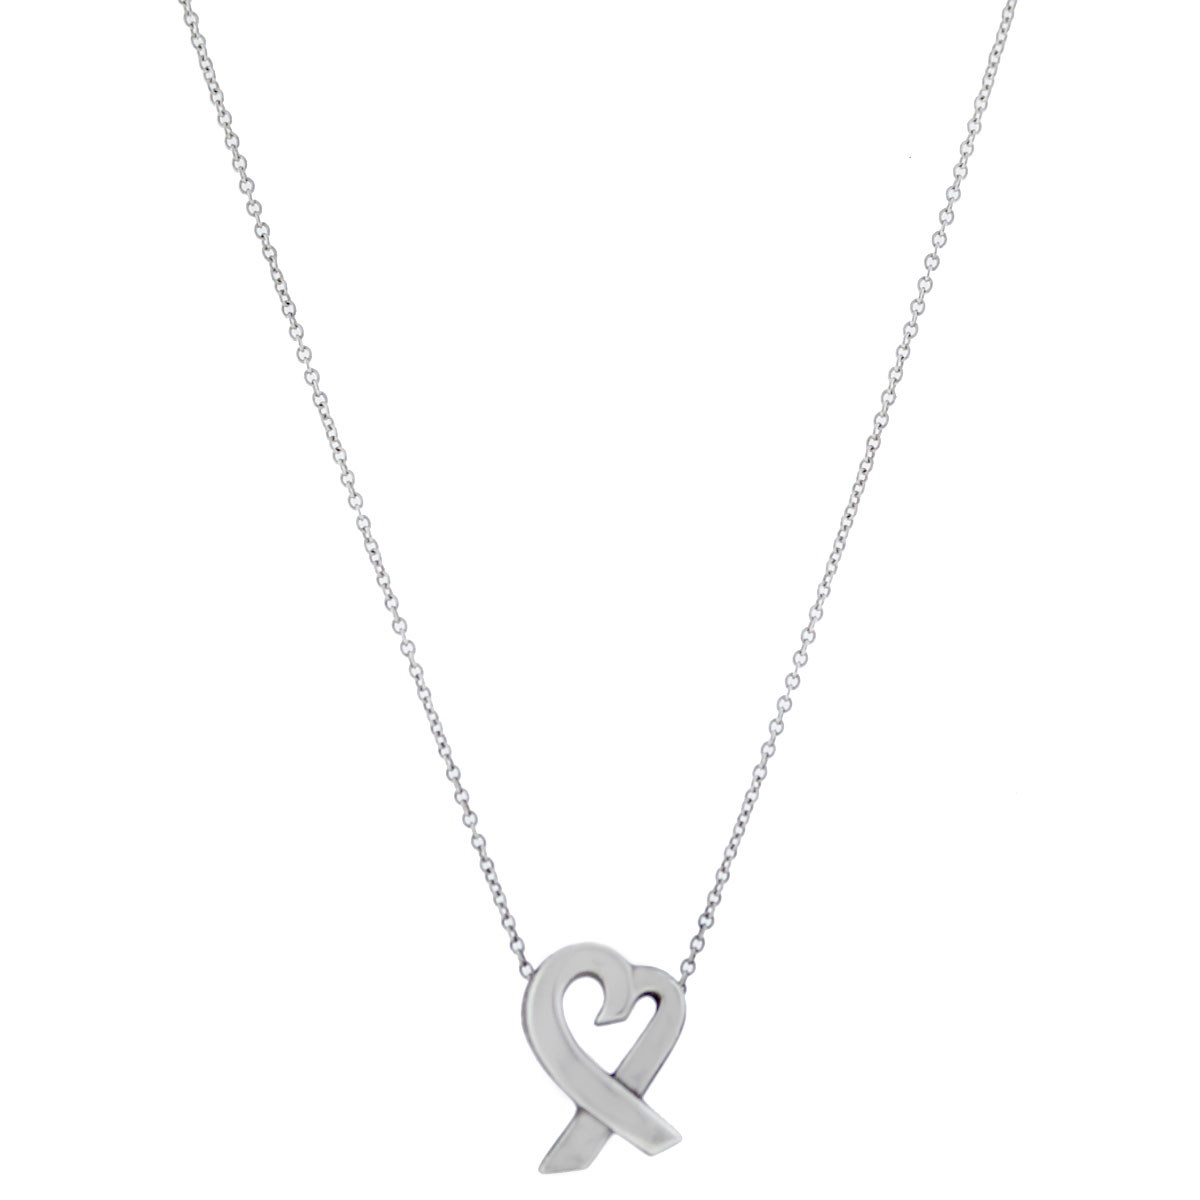 Tiffany & Co. Small Loving Heart Sterling Silver Pendant Necklace